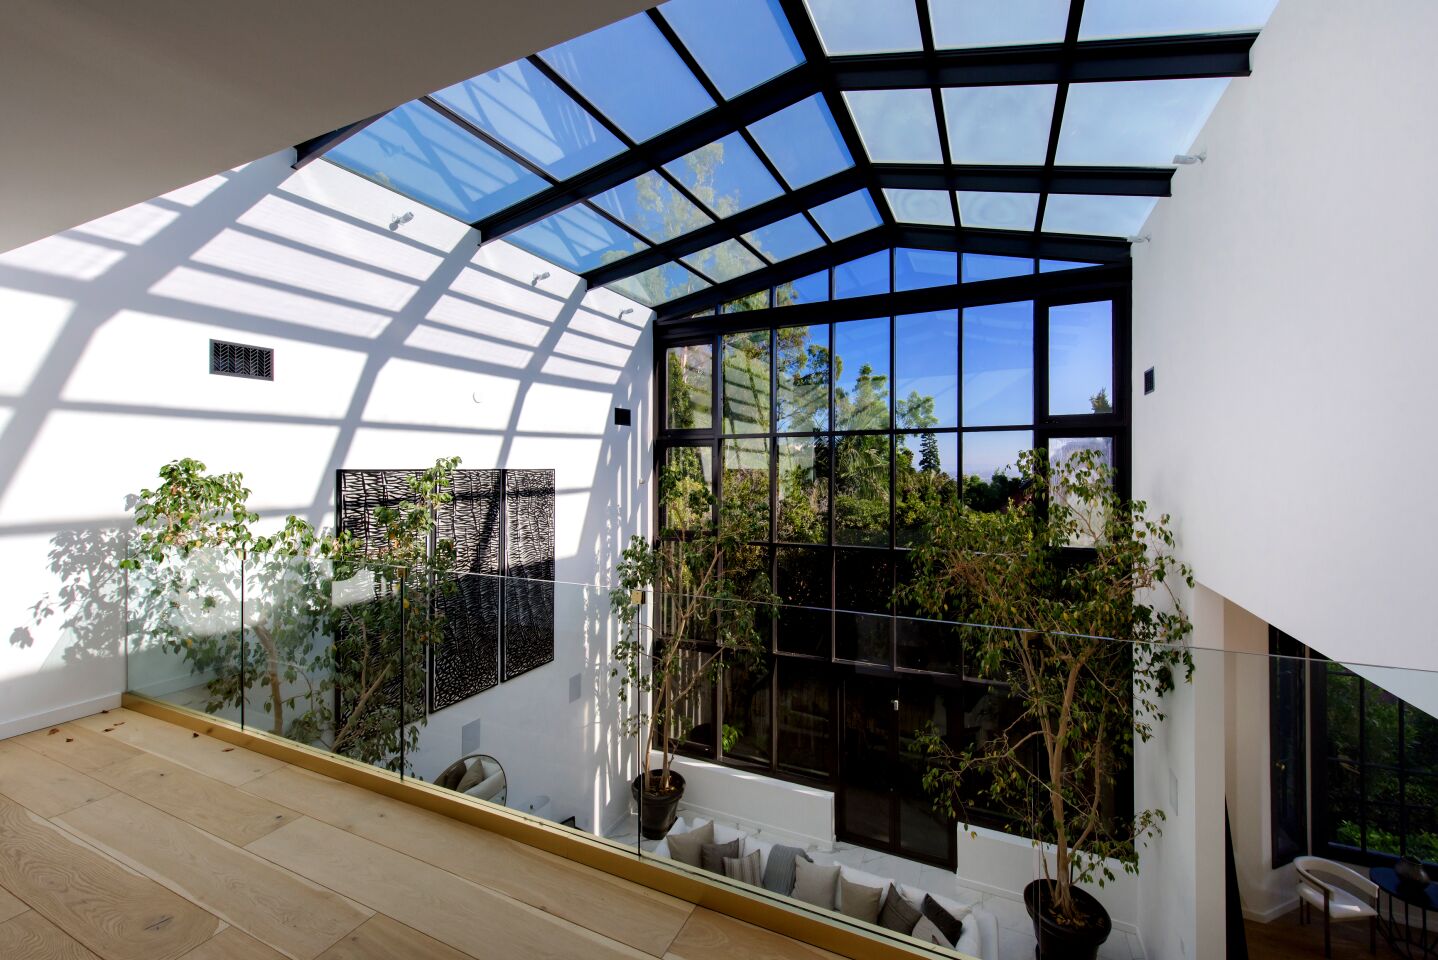 Indoors and outdoors seamlessly flow together.